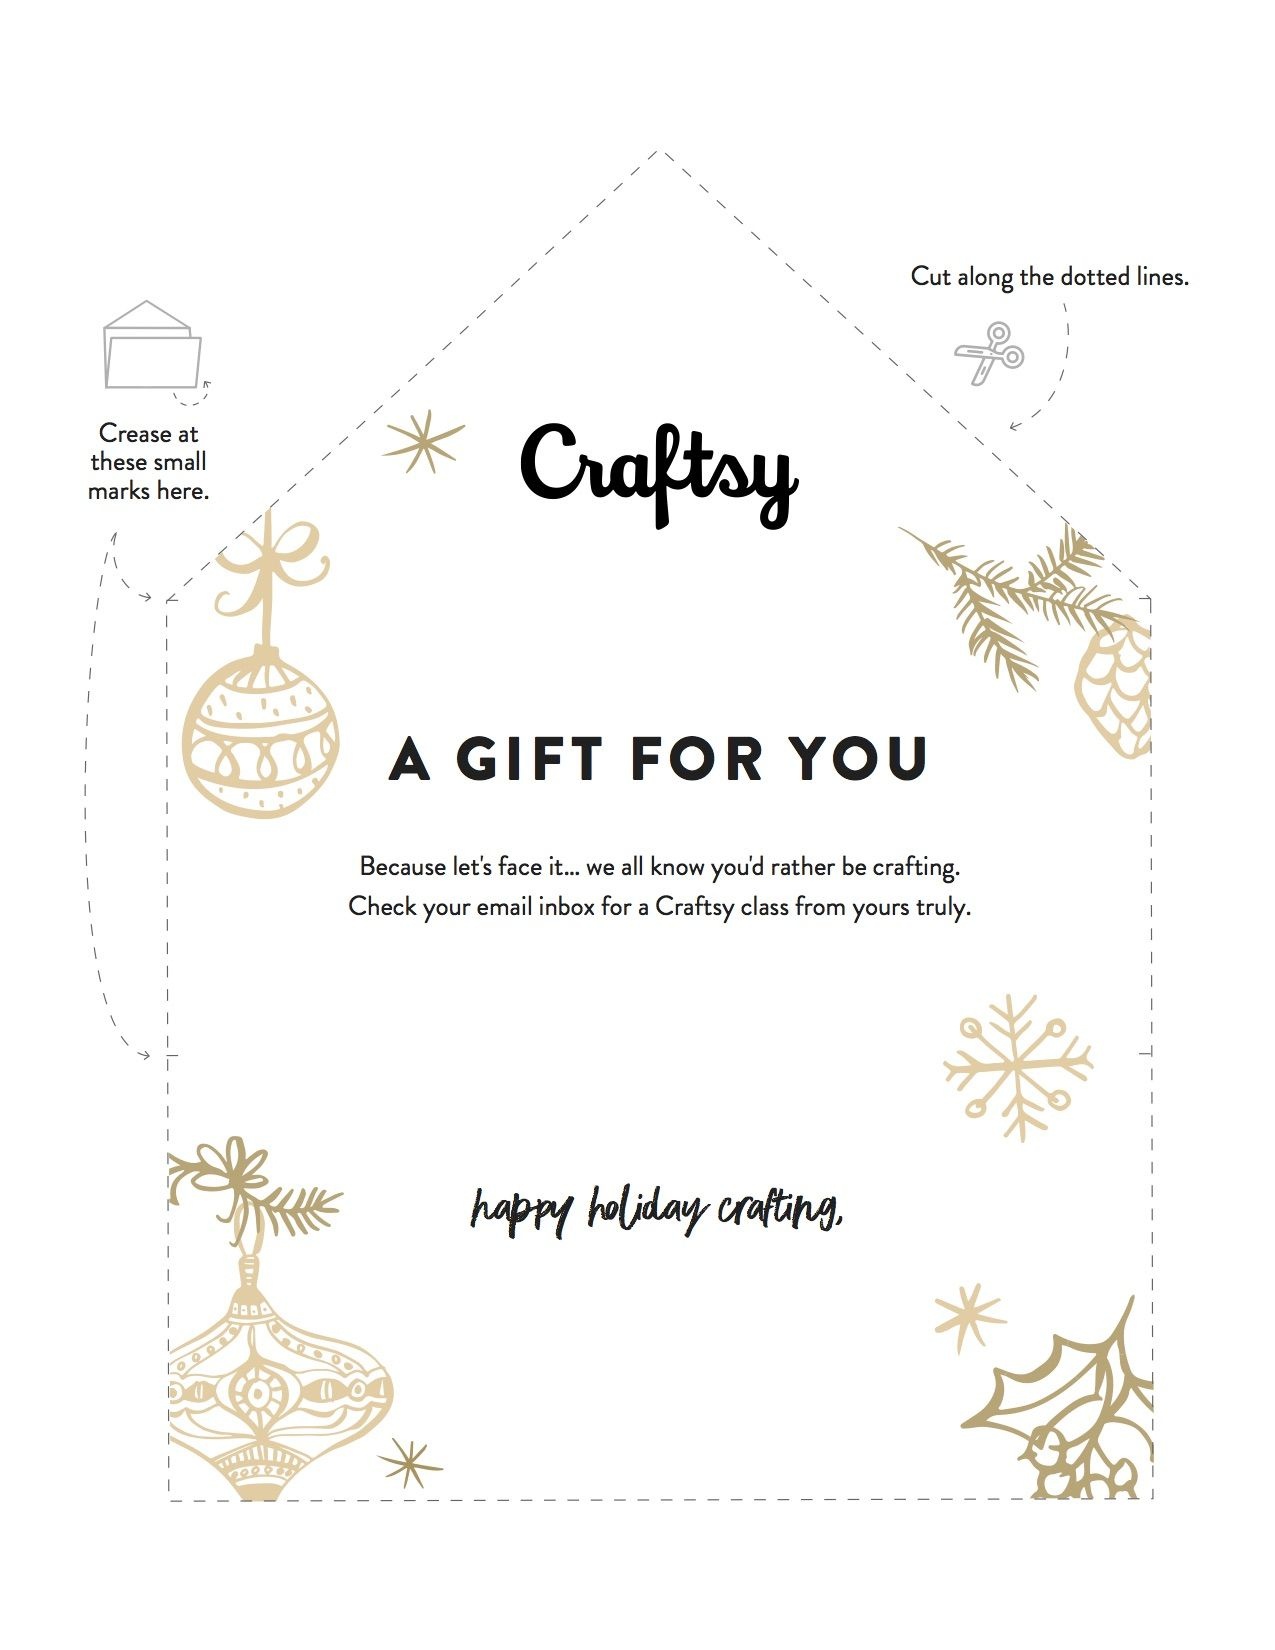 A Free Printable Gift Certificate For Craftsy Classes | Printables - Free Printable Xmas Gift Certificates